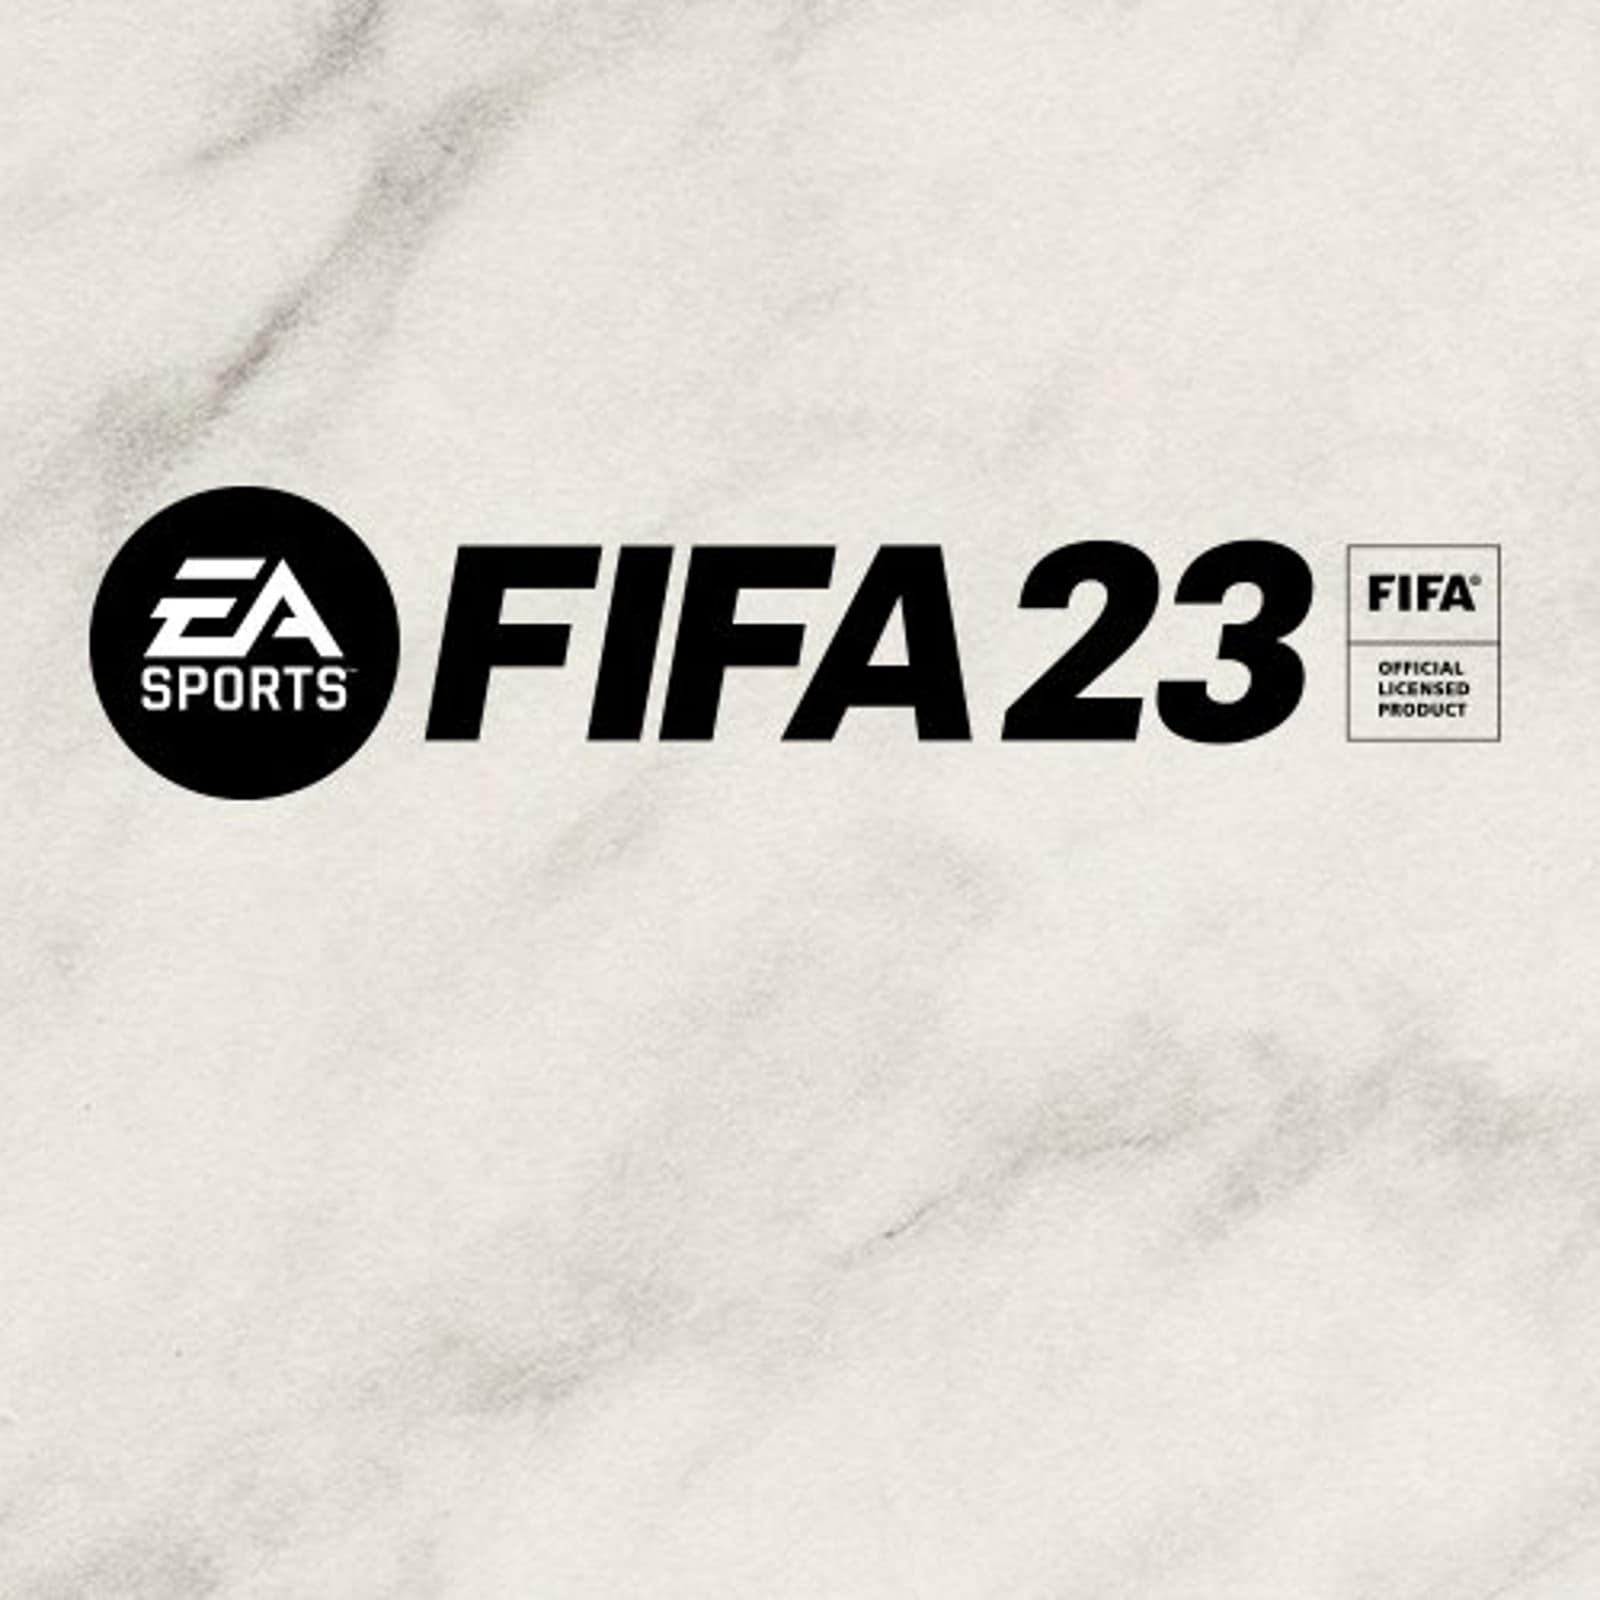 Exclusive: ISL to be featured on console, PC versions of FIFA 22